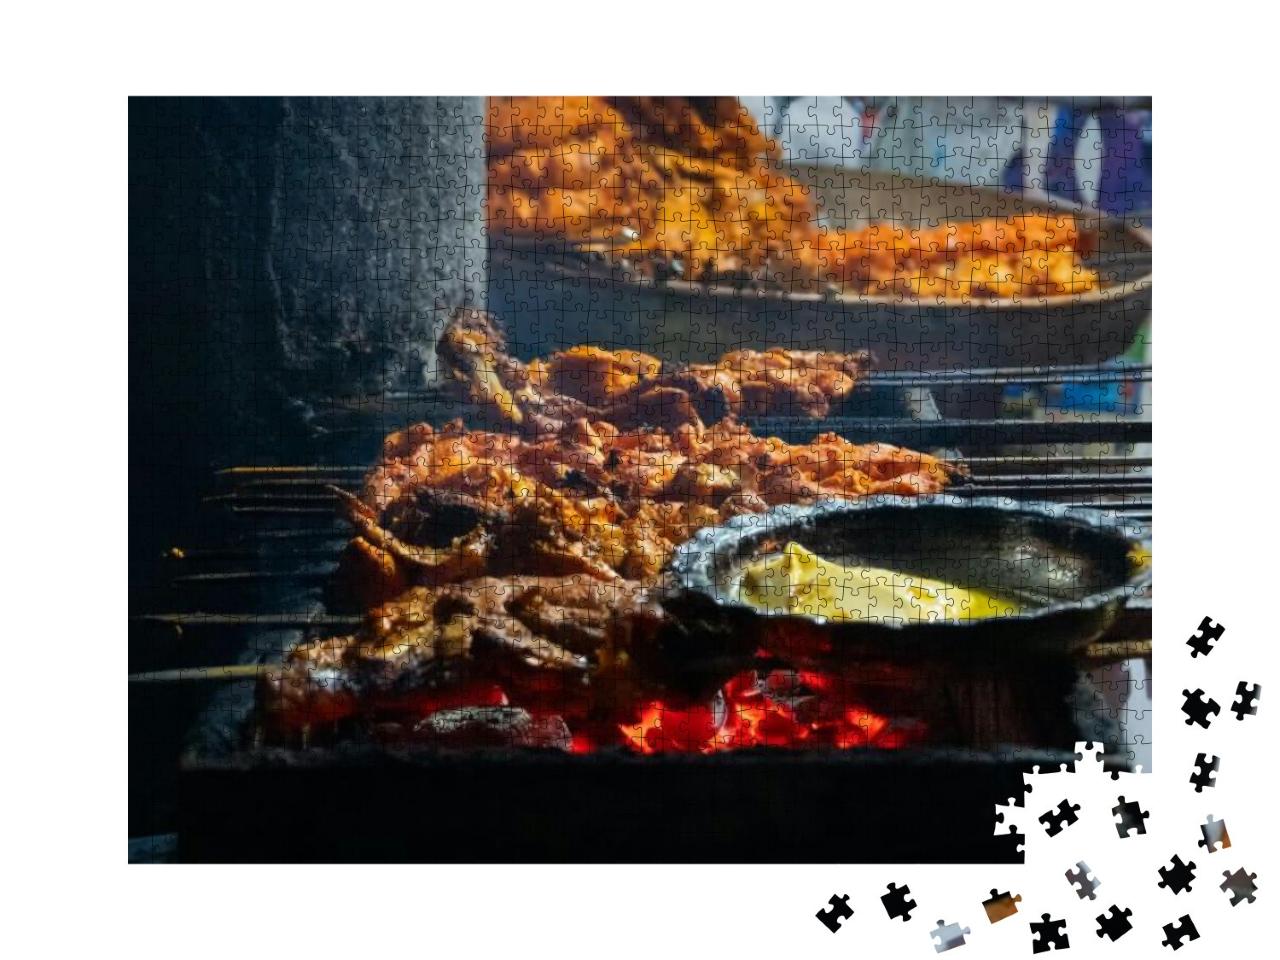 Spicy Chicken Seekh Kababs Are Being Grilled with Charcoa... Jigsaw Puzzle with 1000 pieces